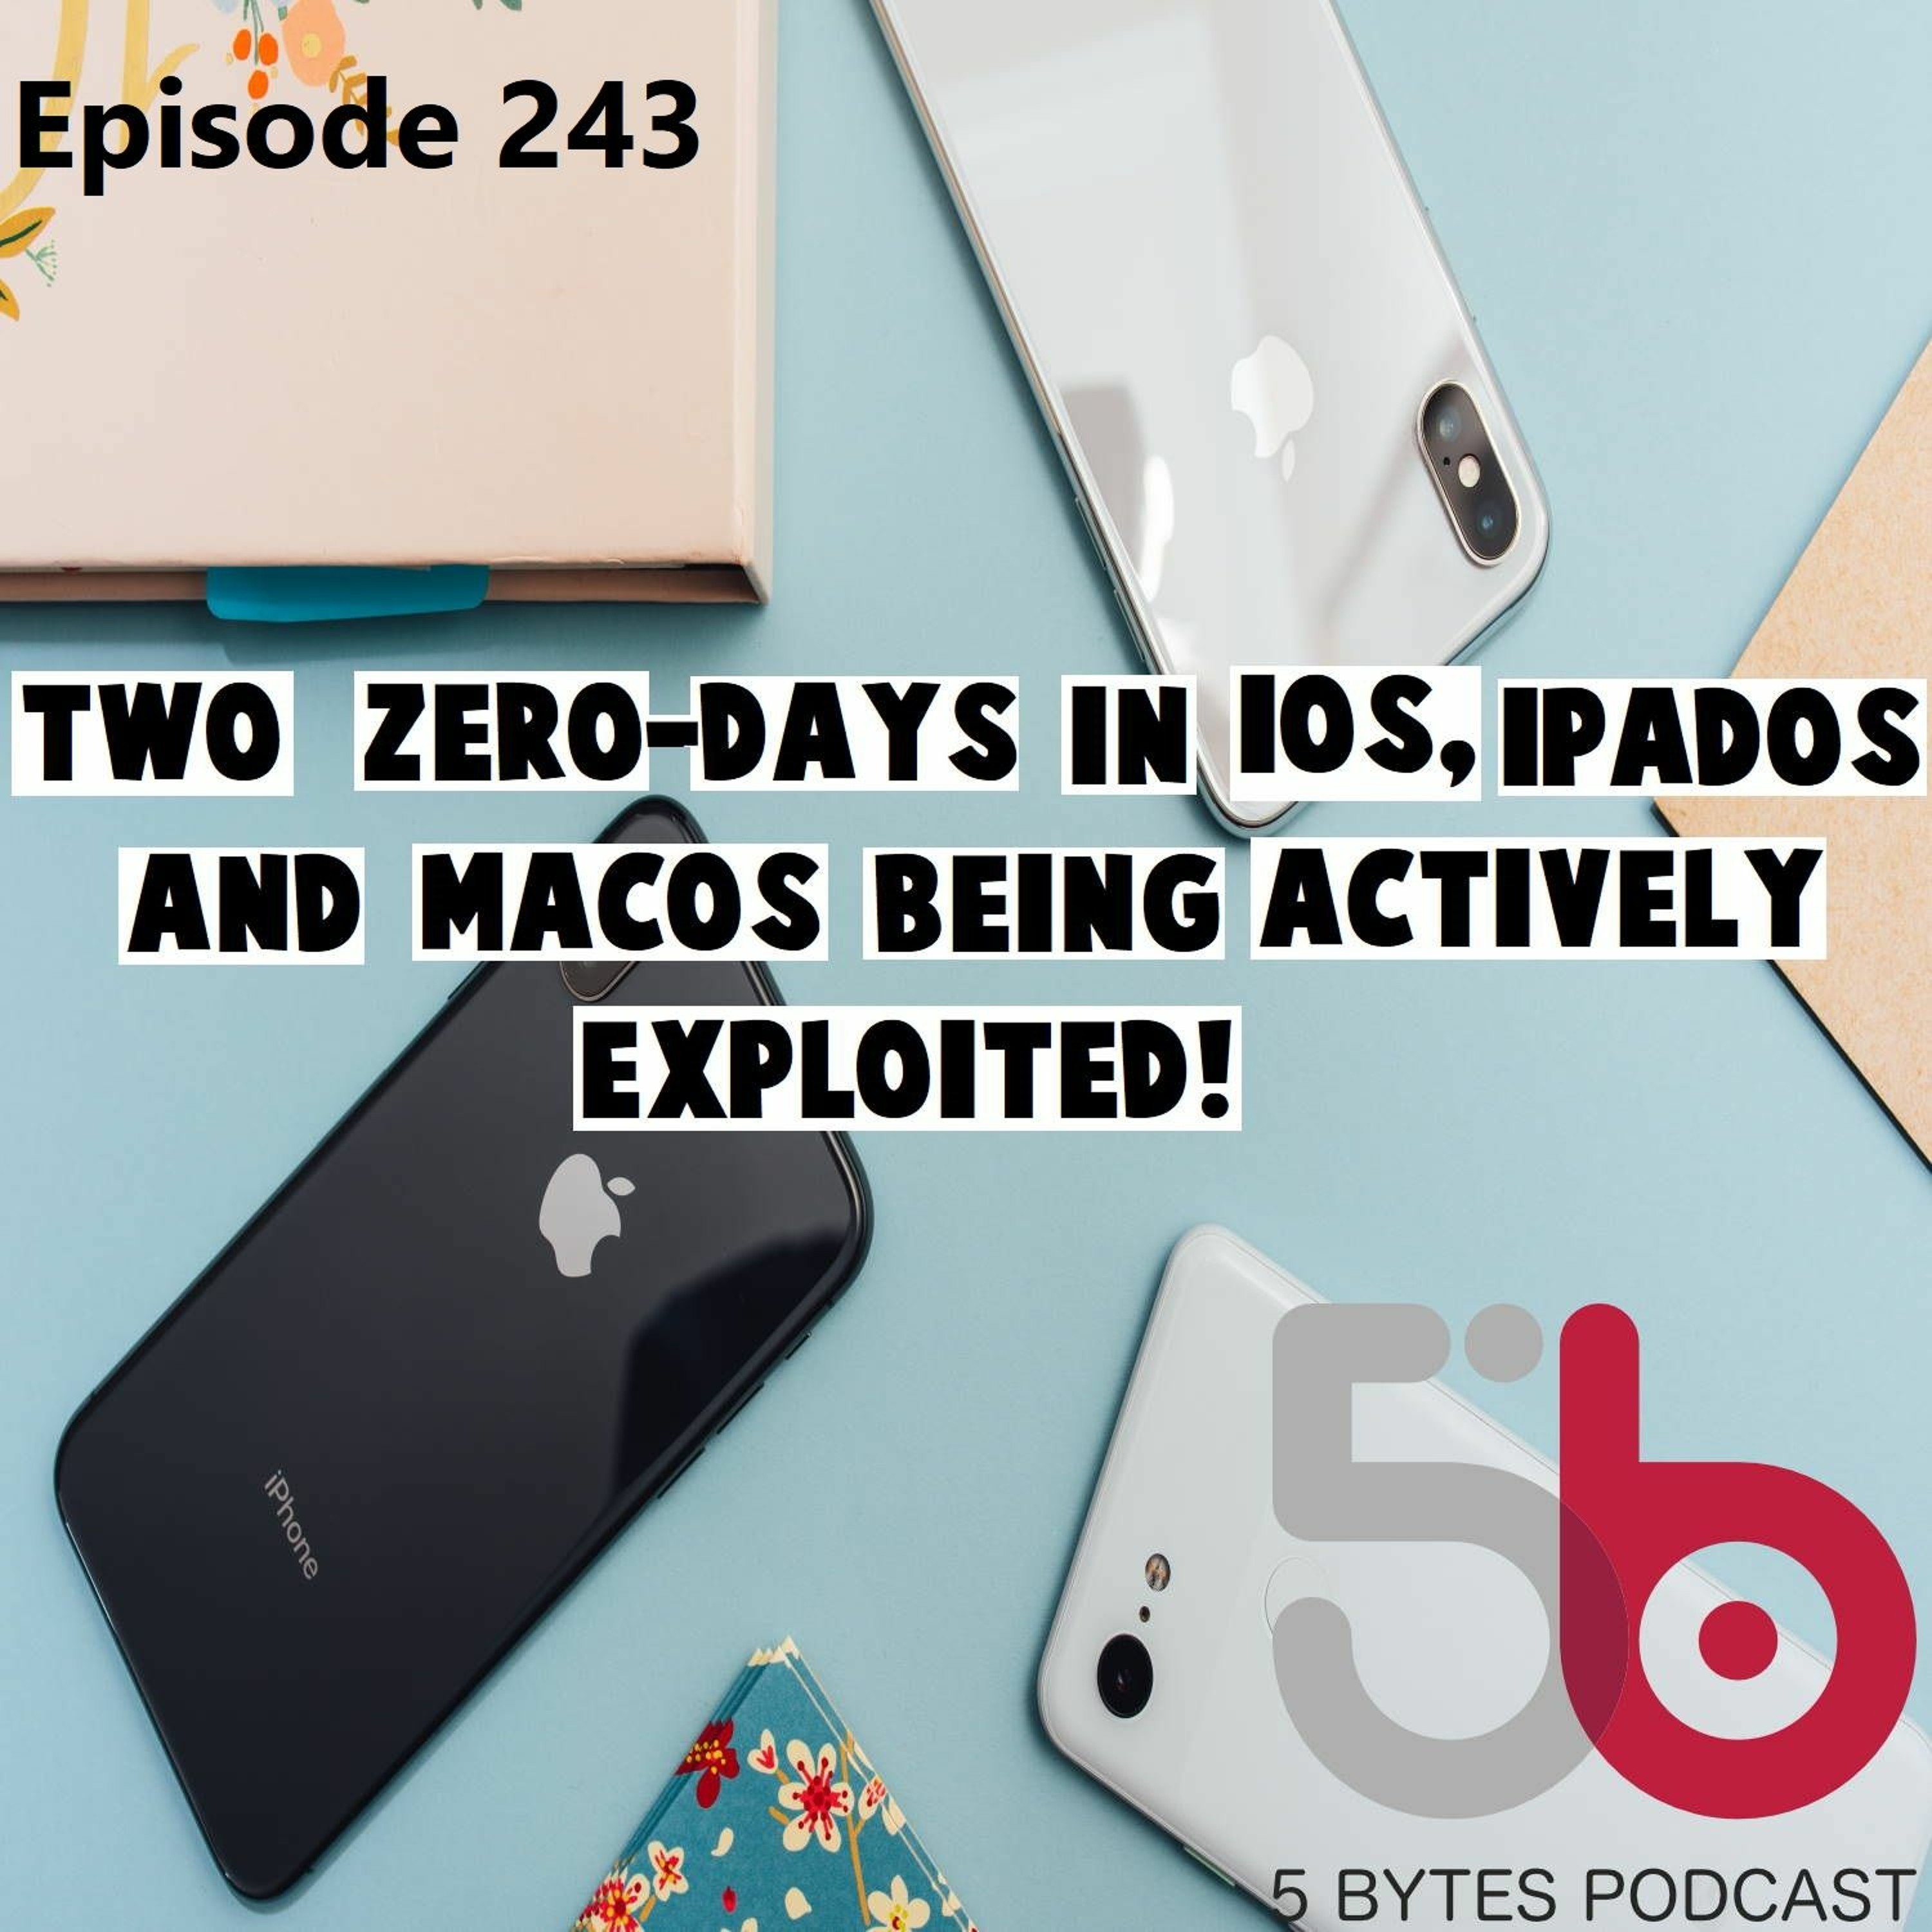 Two Apple Zero-Days Being Actively Exploited! Patch Tuesday Fallout! Cool PowerToys Feature!